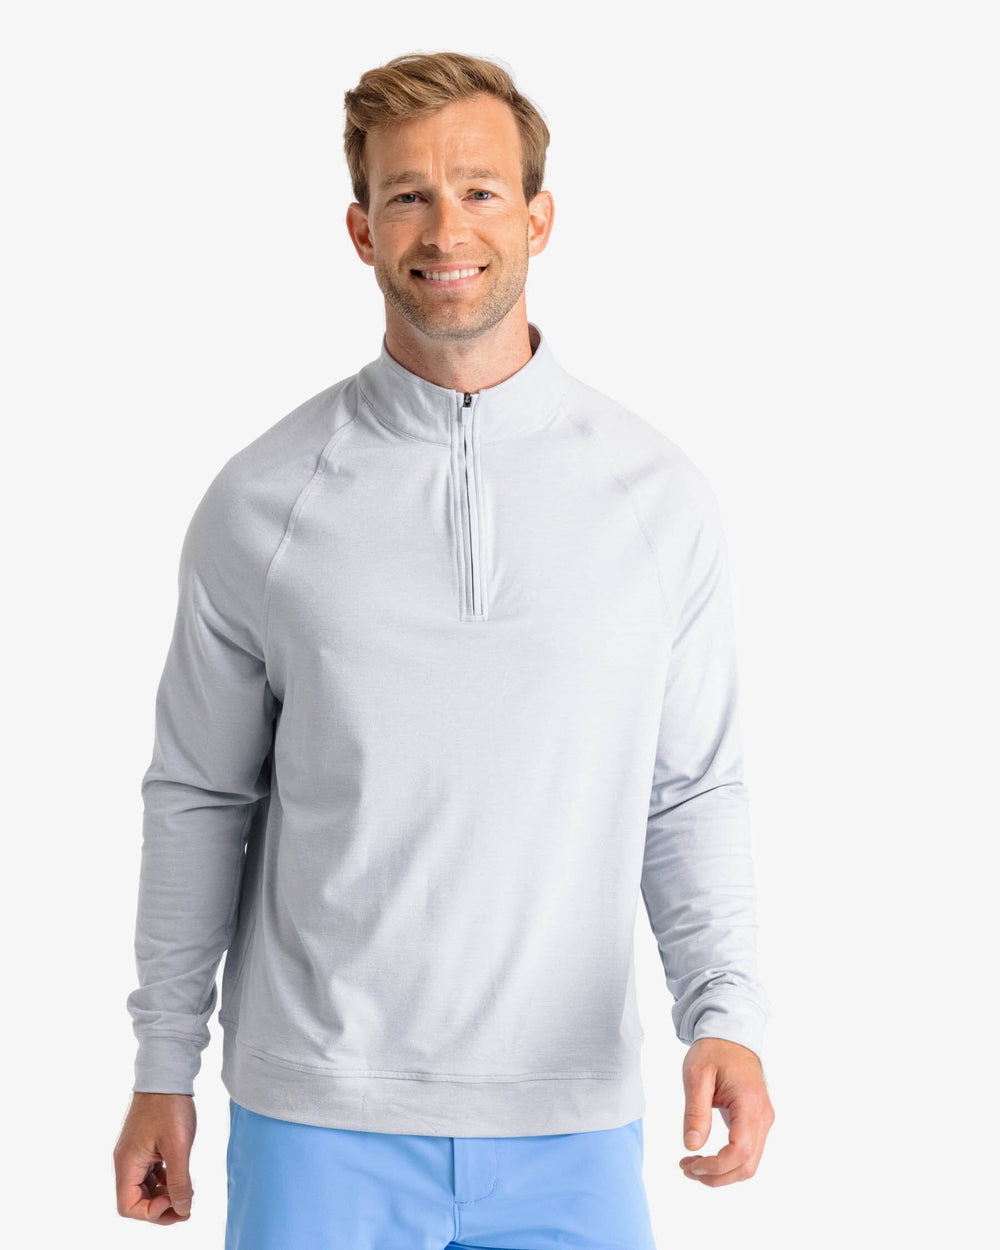 The front view of the Southern Tide Cruiser Heather Quarter Zip by Southern Tide - Heather Slate Grey